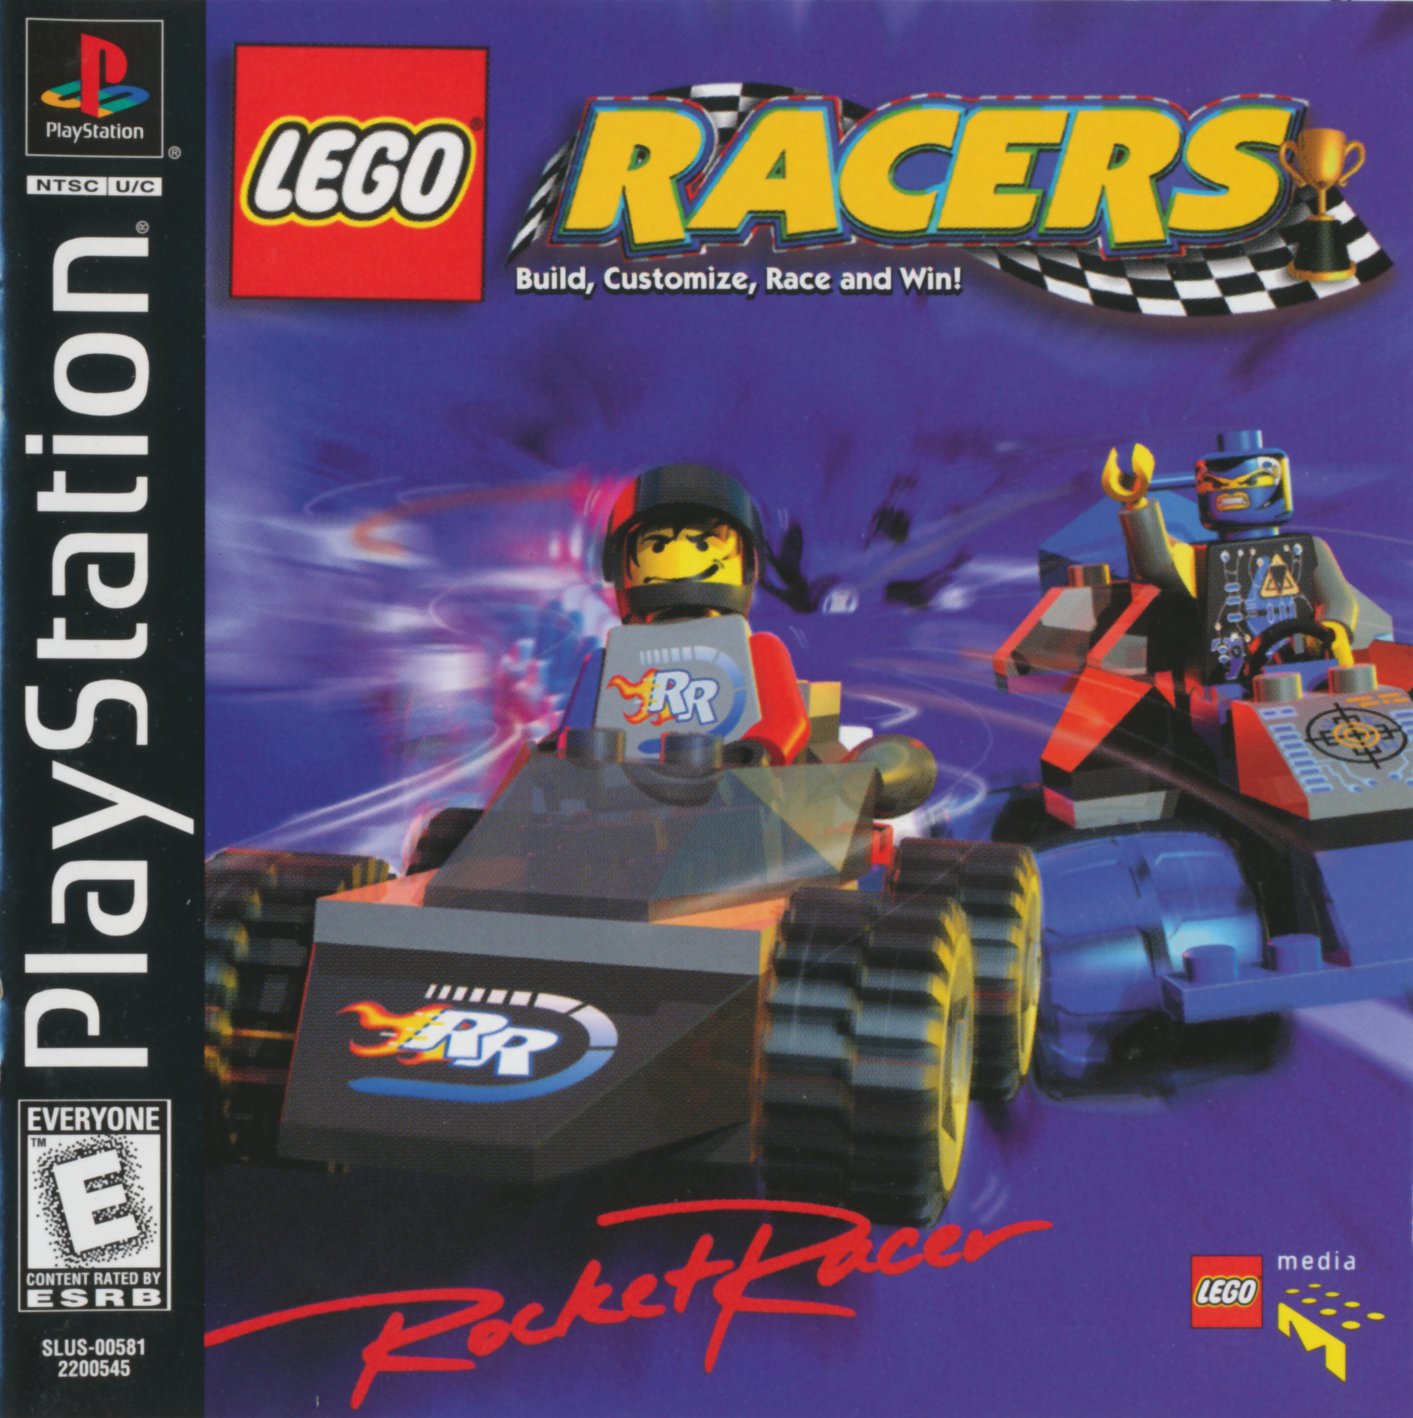 Lego Racers PSX cover